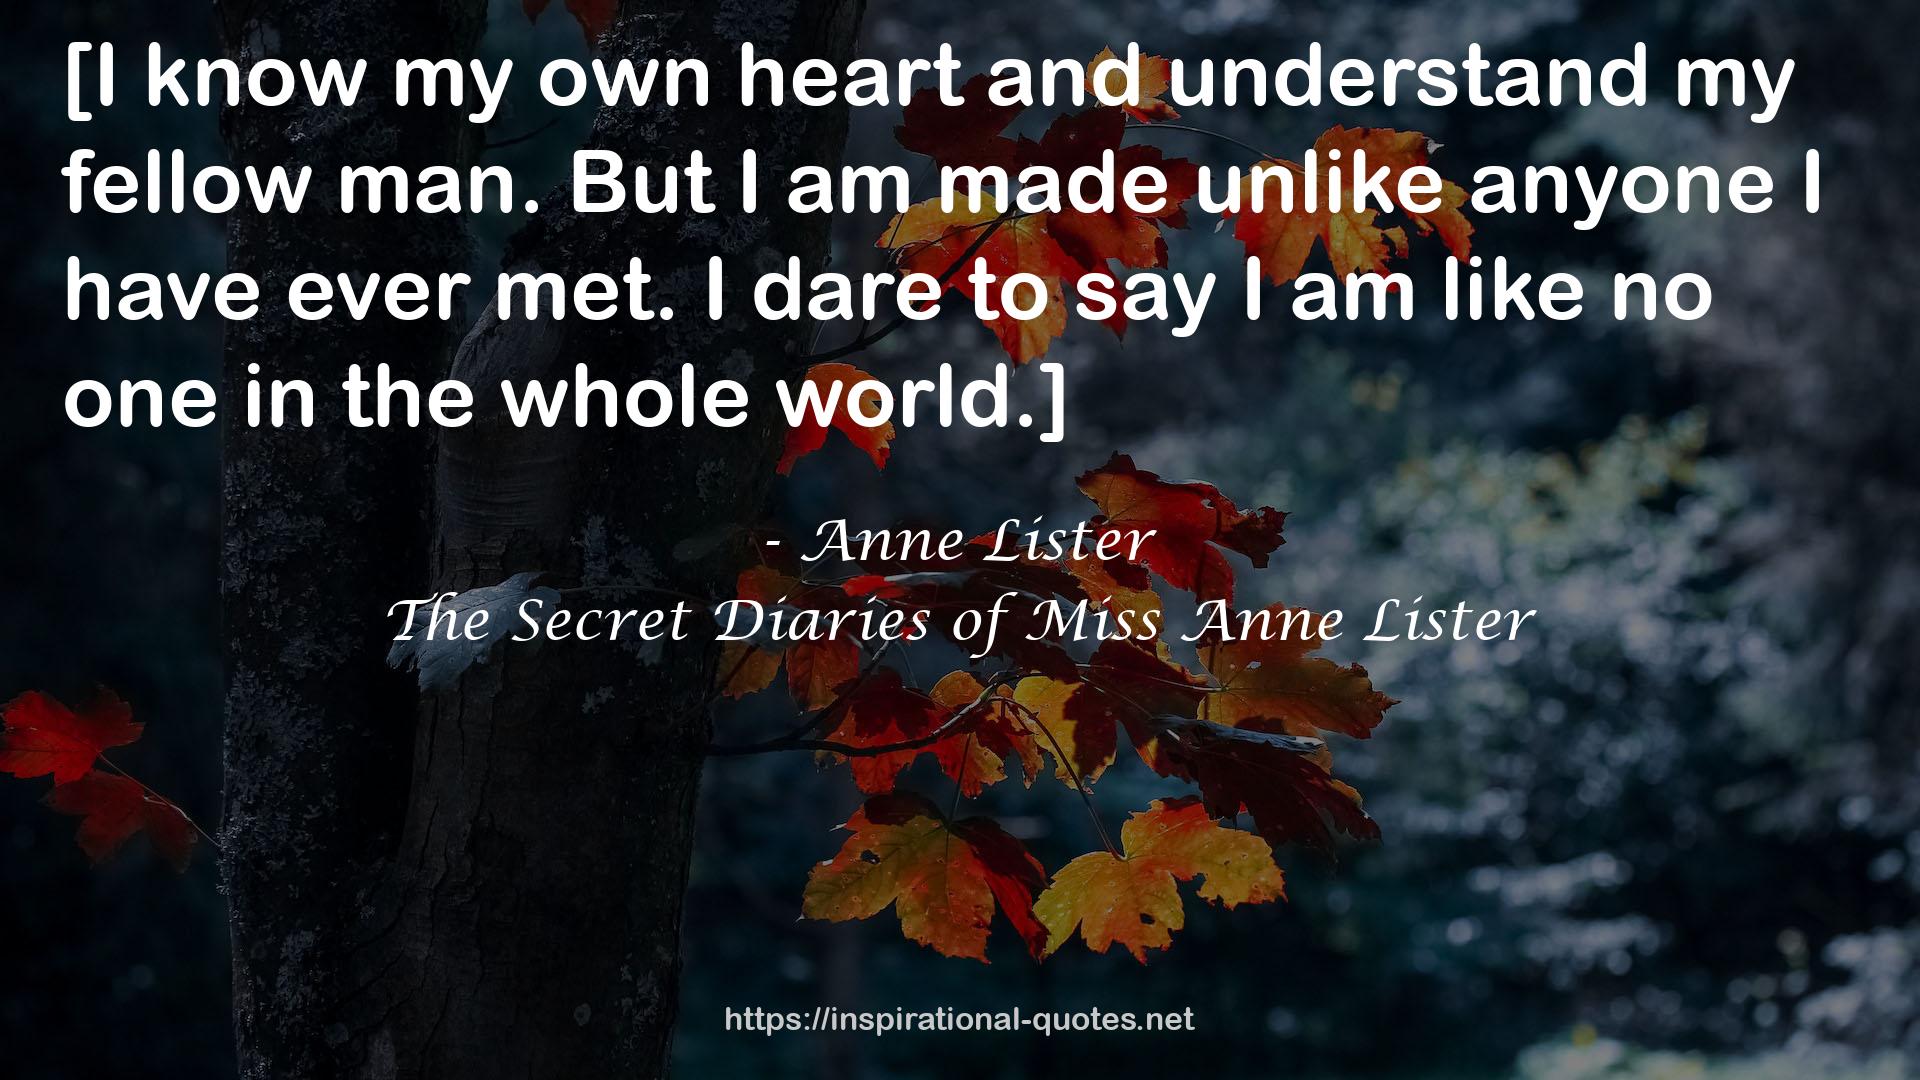 The Secret Diaries of Miss Anne Lister QUOTES